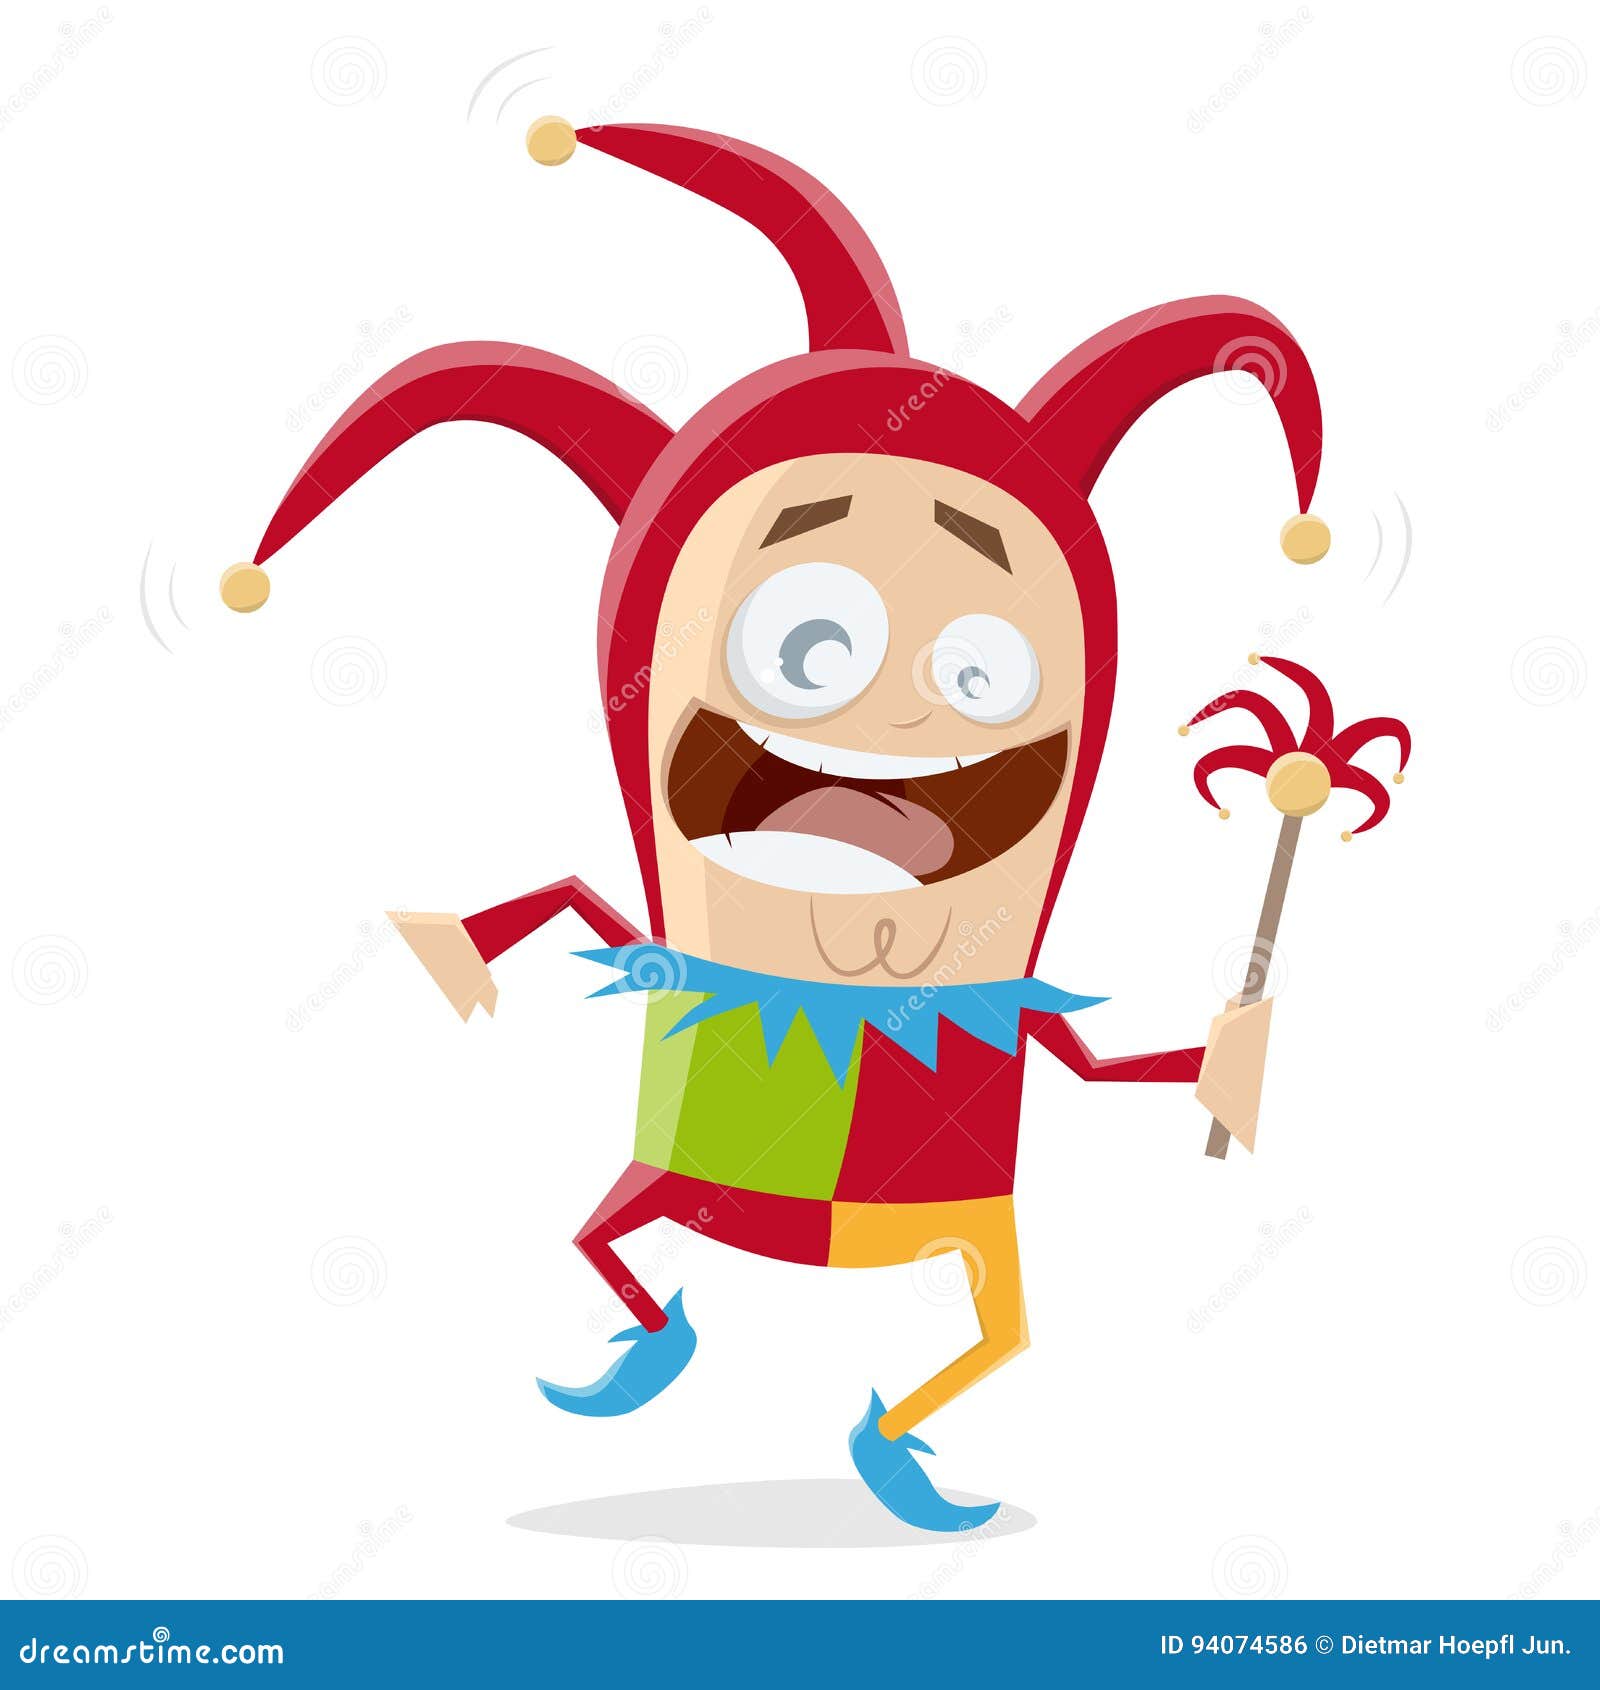 Funny jester clipart stock vector. Illustration of happy - 94074586